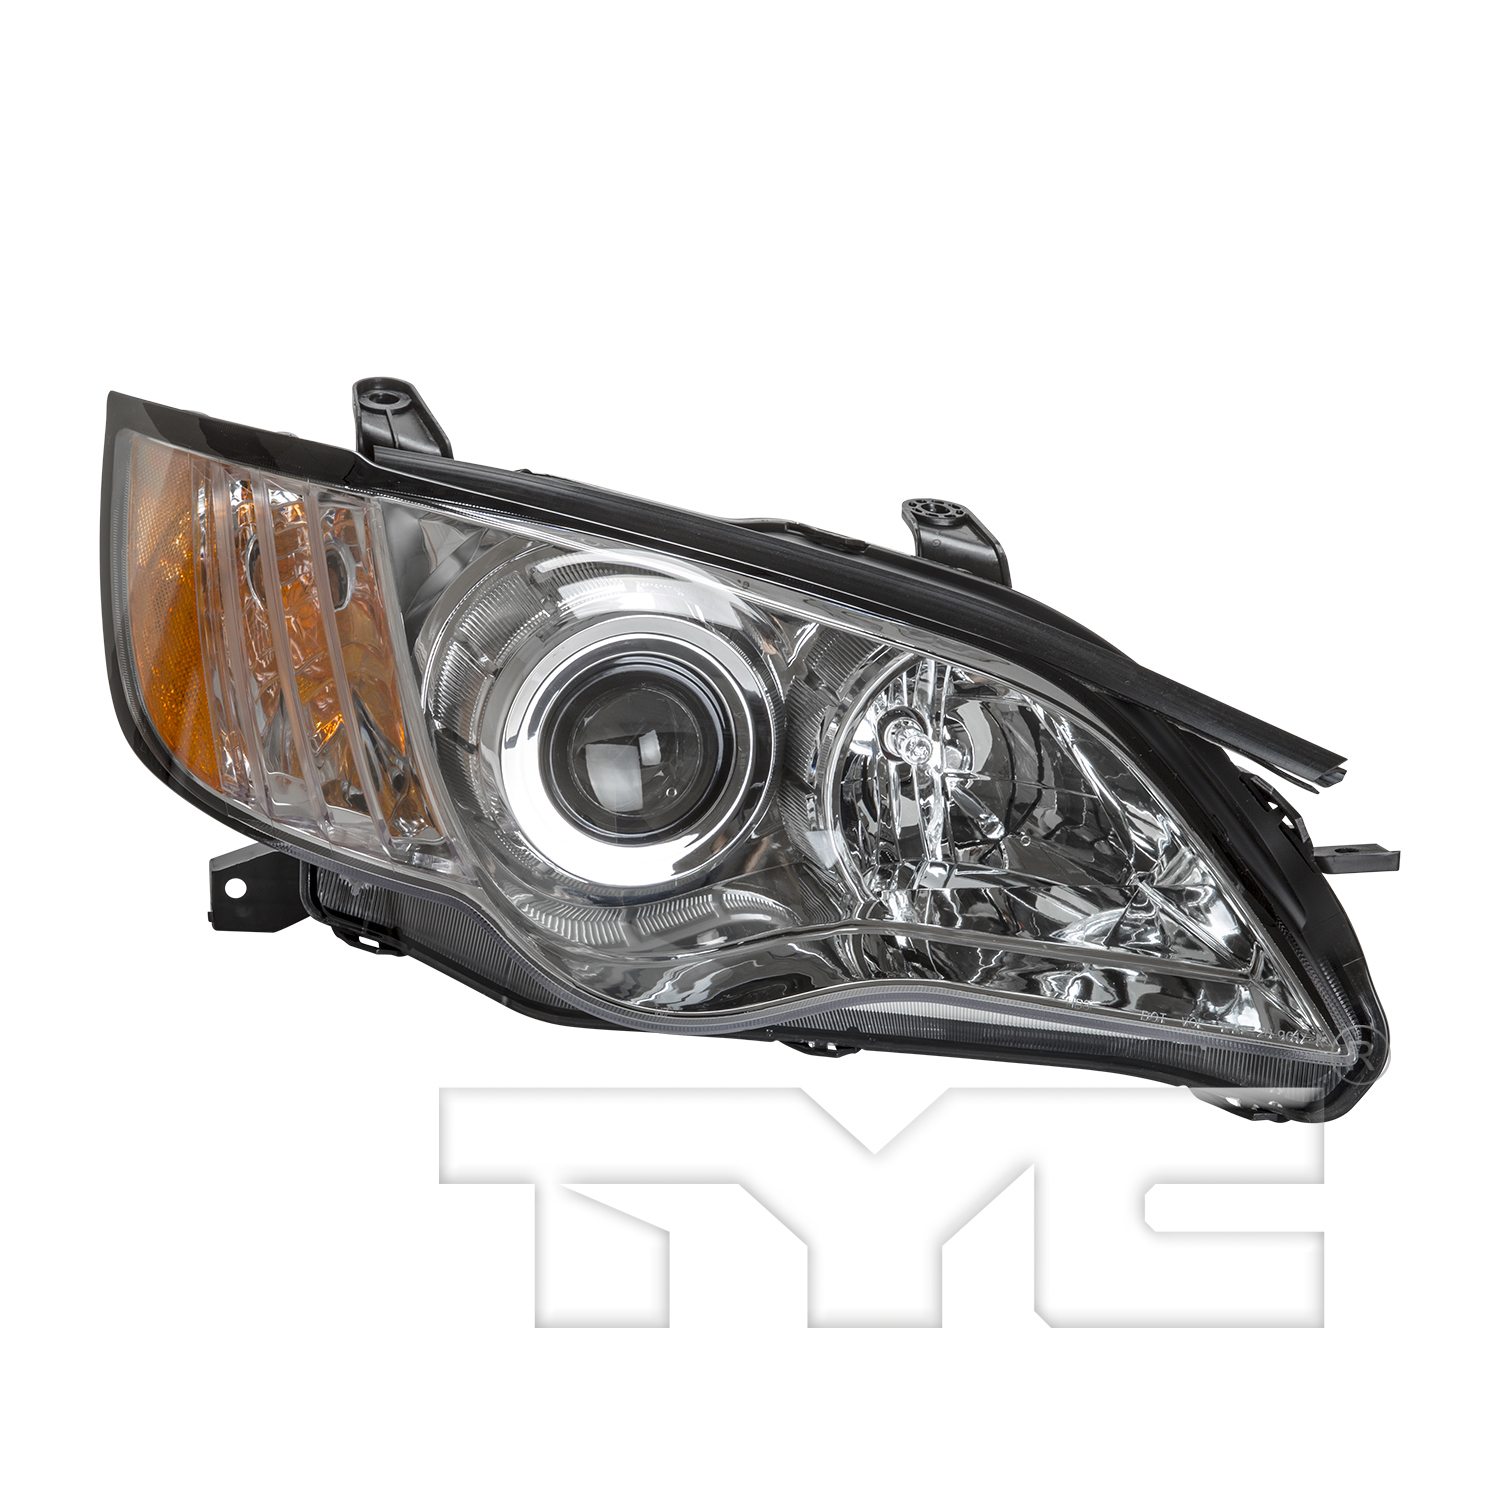 Aftermarket HEADLIGHTS for SUBARU - LEGACY, LEGACY,08-09,RT Headlamp assy composite